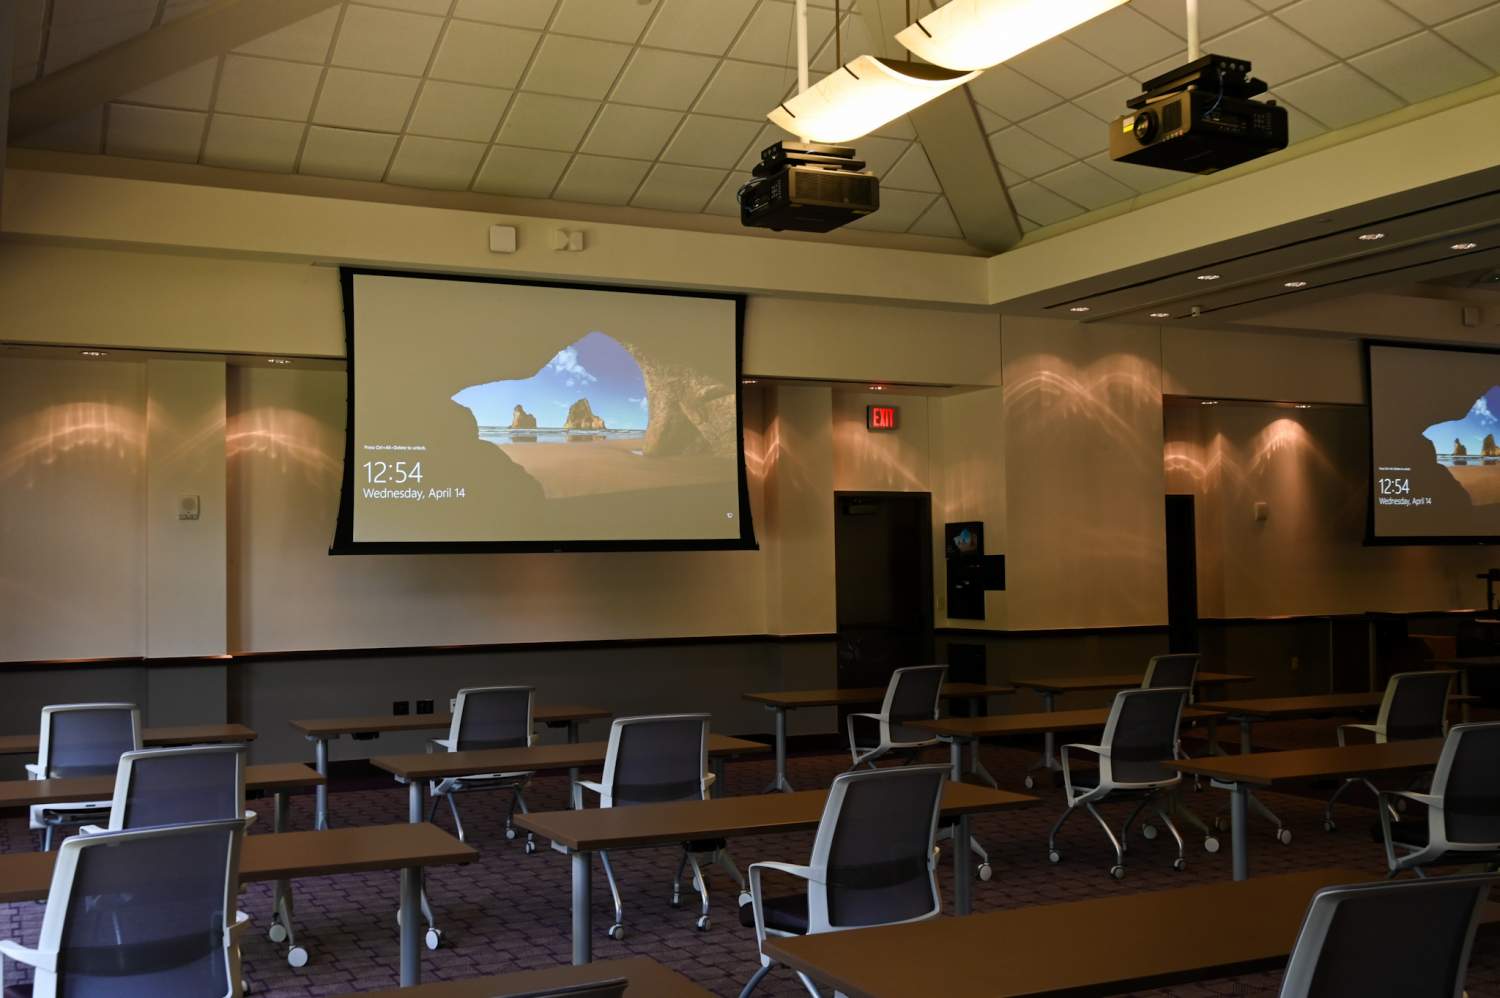 Non-traditional classroom set up in the Dee J. Kelly Alumni & Visitors Center